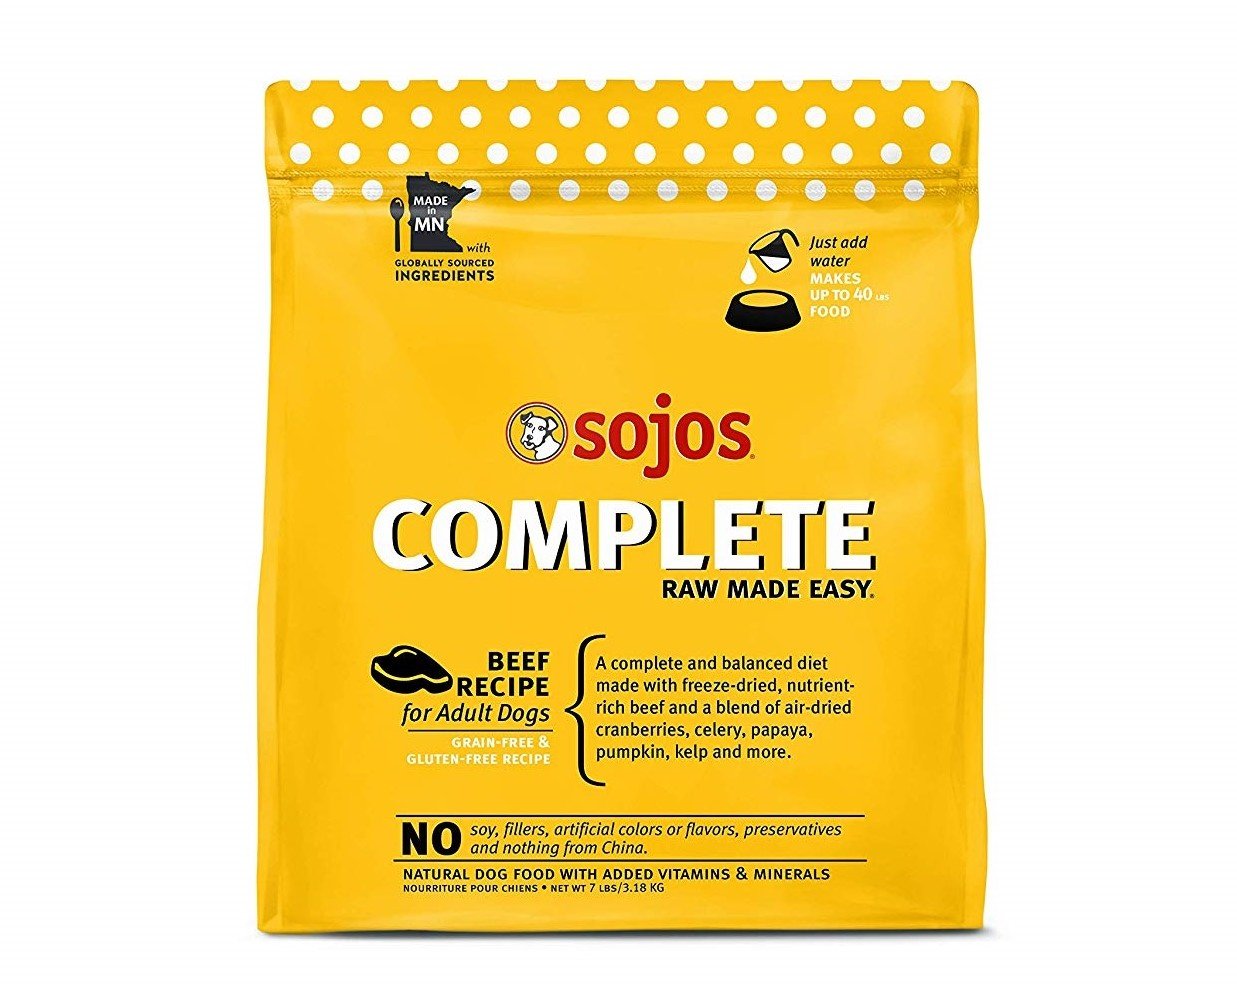 Sojourner Farms (Sojo's) Sojos Grain-Free Freeze-Dried Complete Beef 1.75 lb